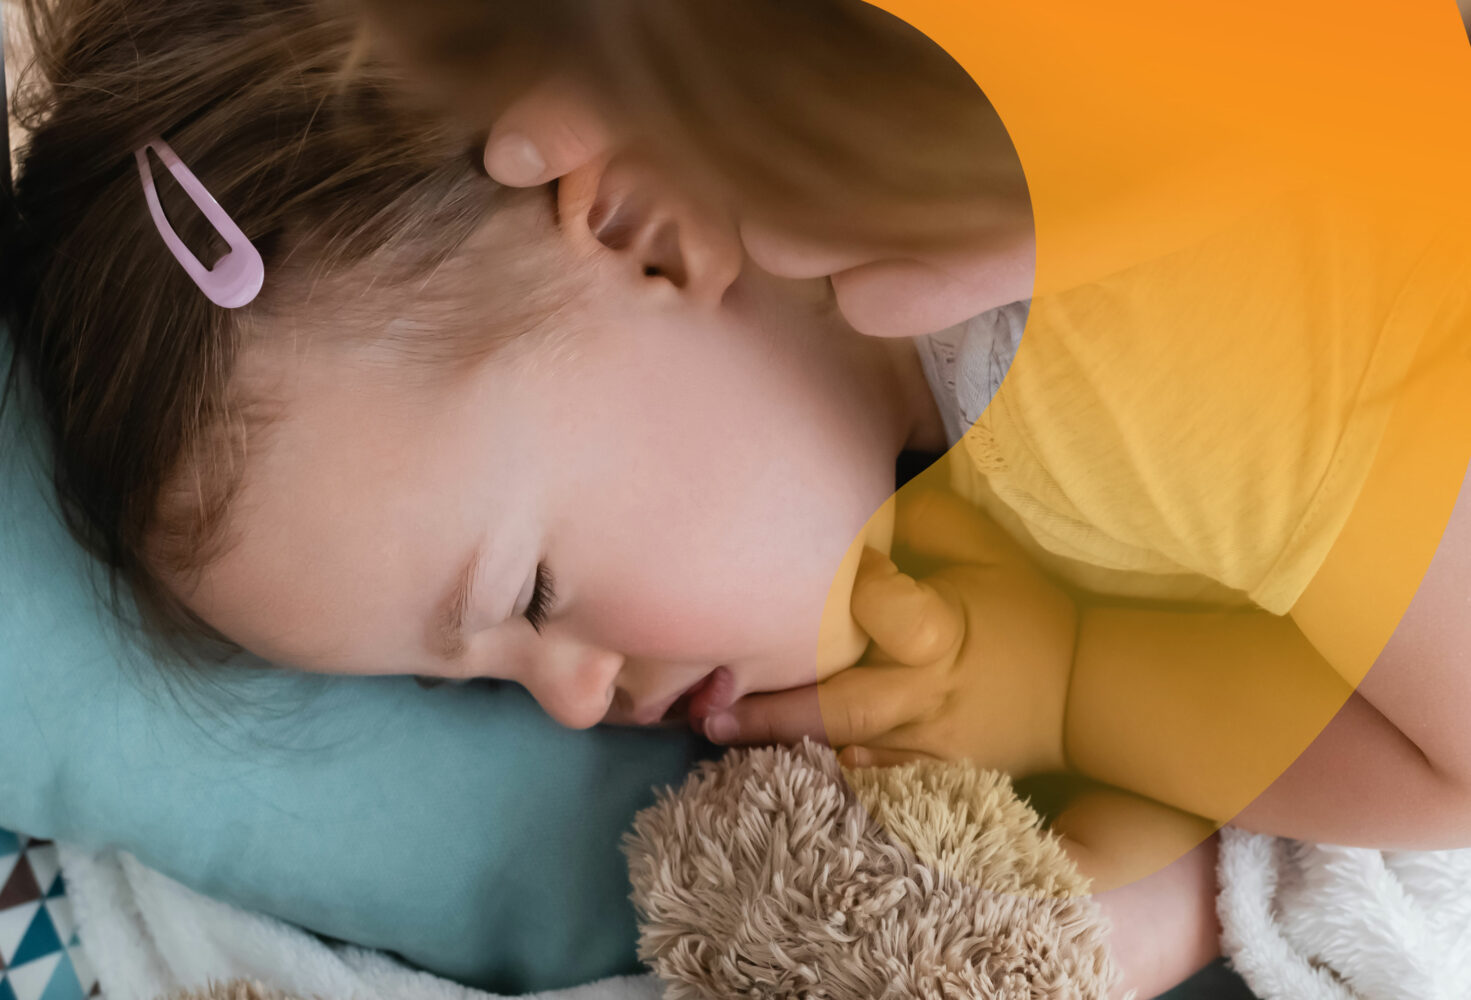 female toddler with Down syndrome sleeps on blue pillow, cuddling teddy bear